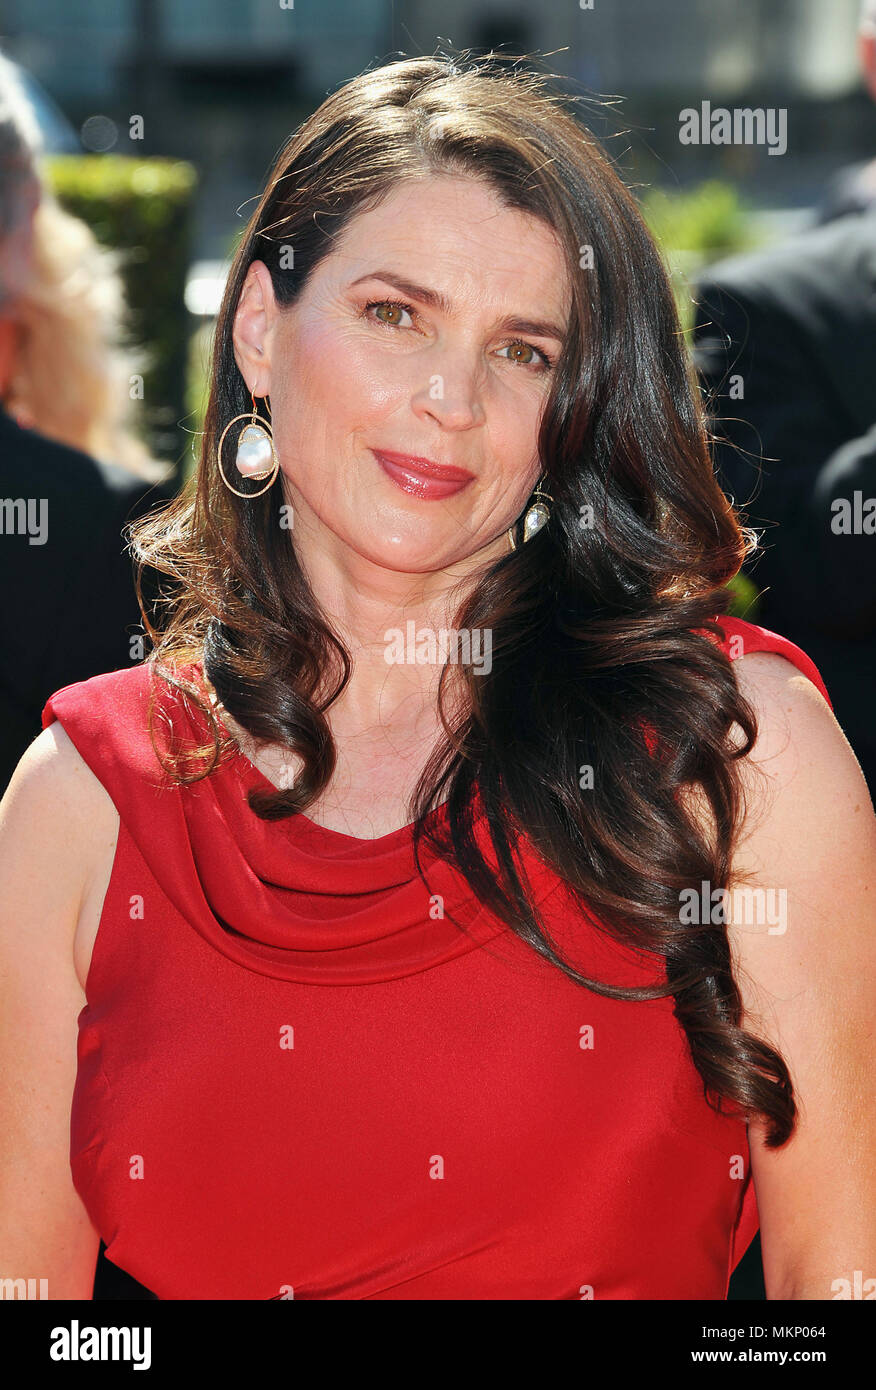 Julia Ormond High Resolution Stock Photography and Images - Alamy